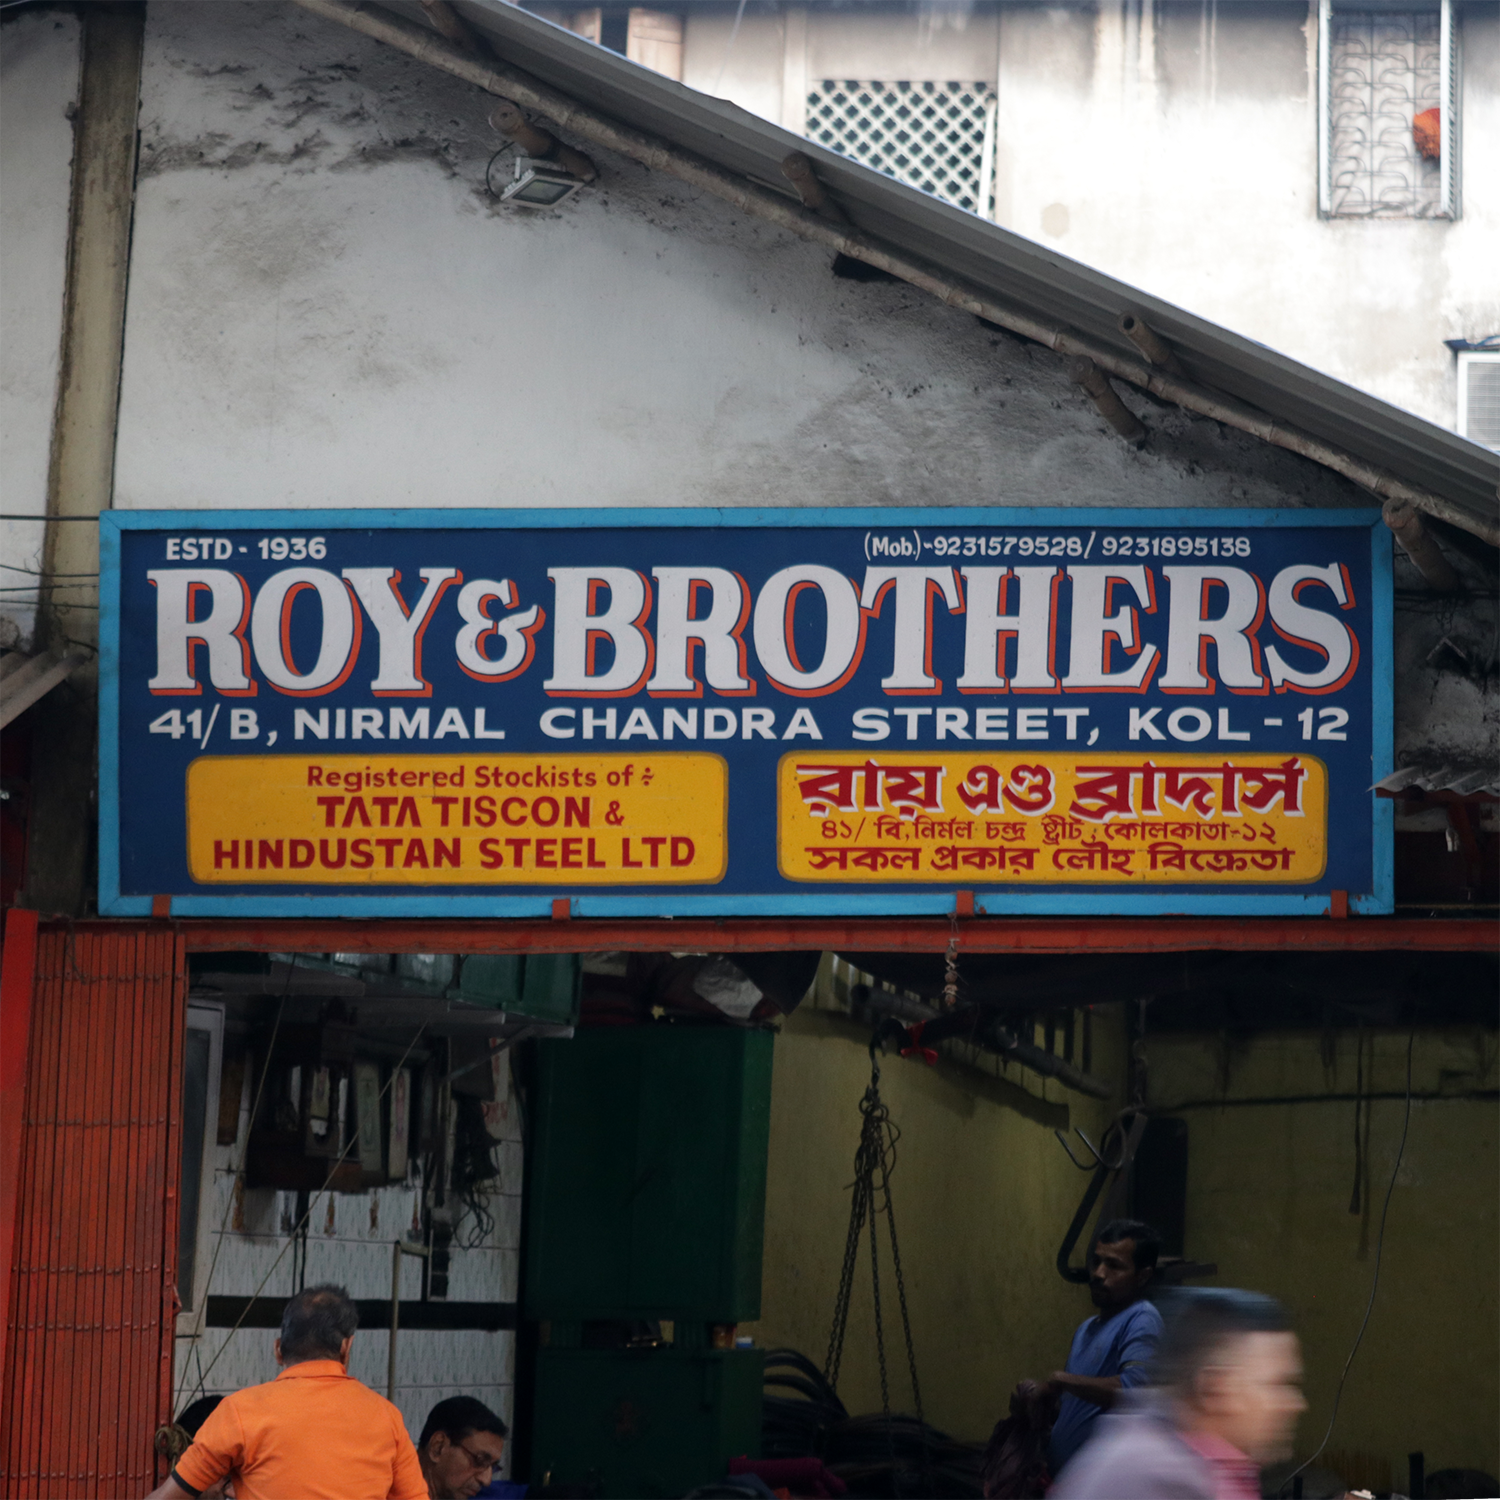 Roy & Brothers